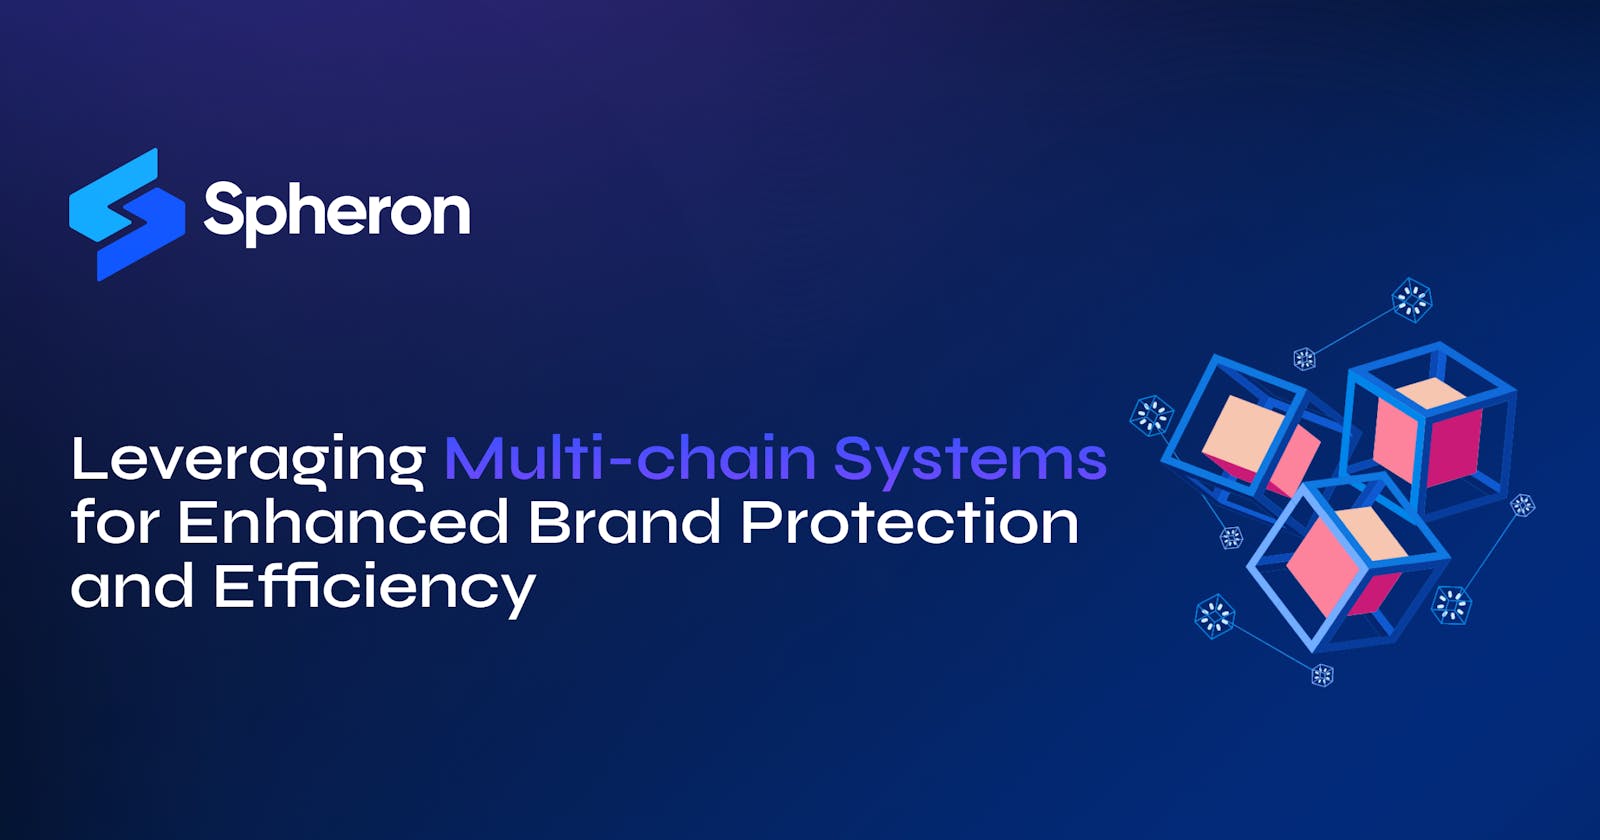 Leveraging Multi-chain Systems for Enhanced Brand Protection and Efficiency